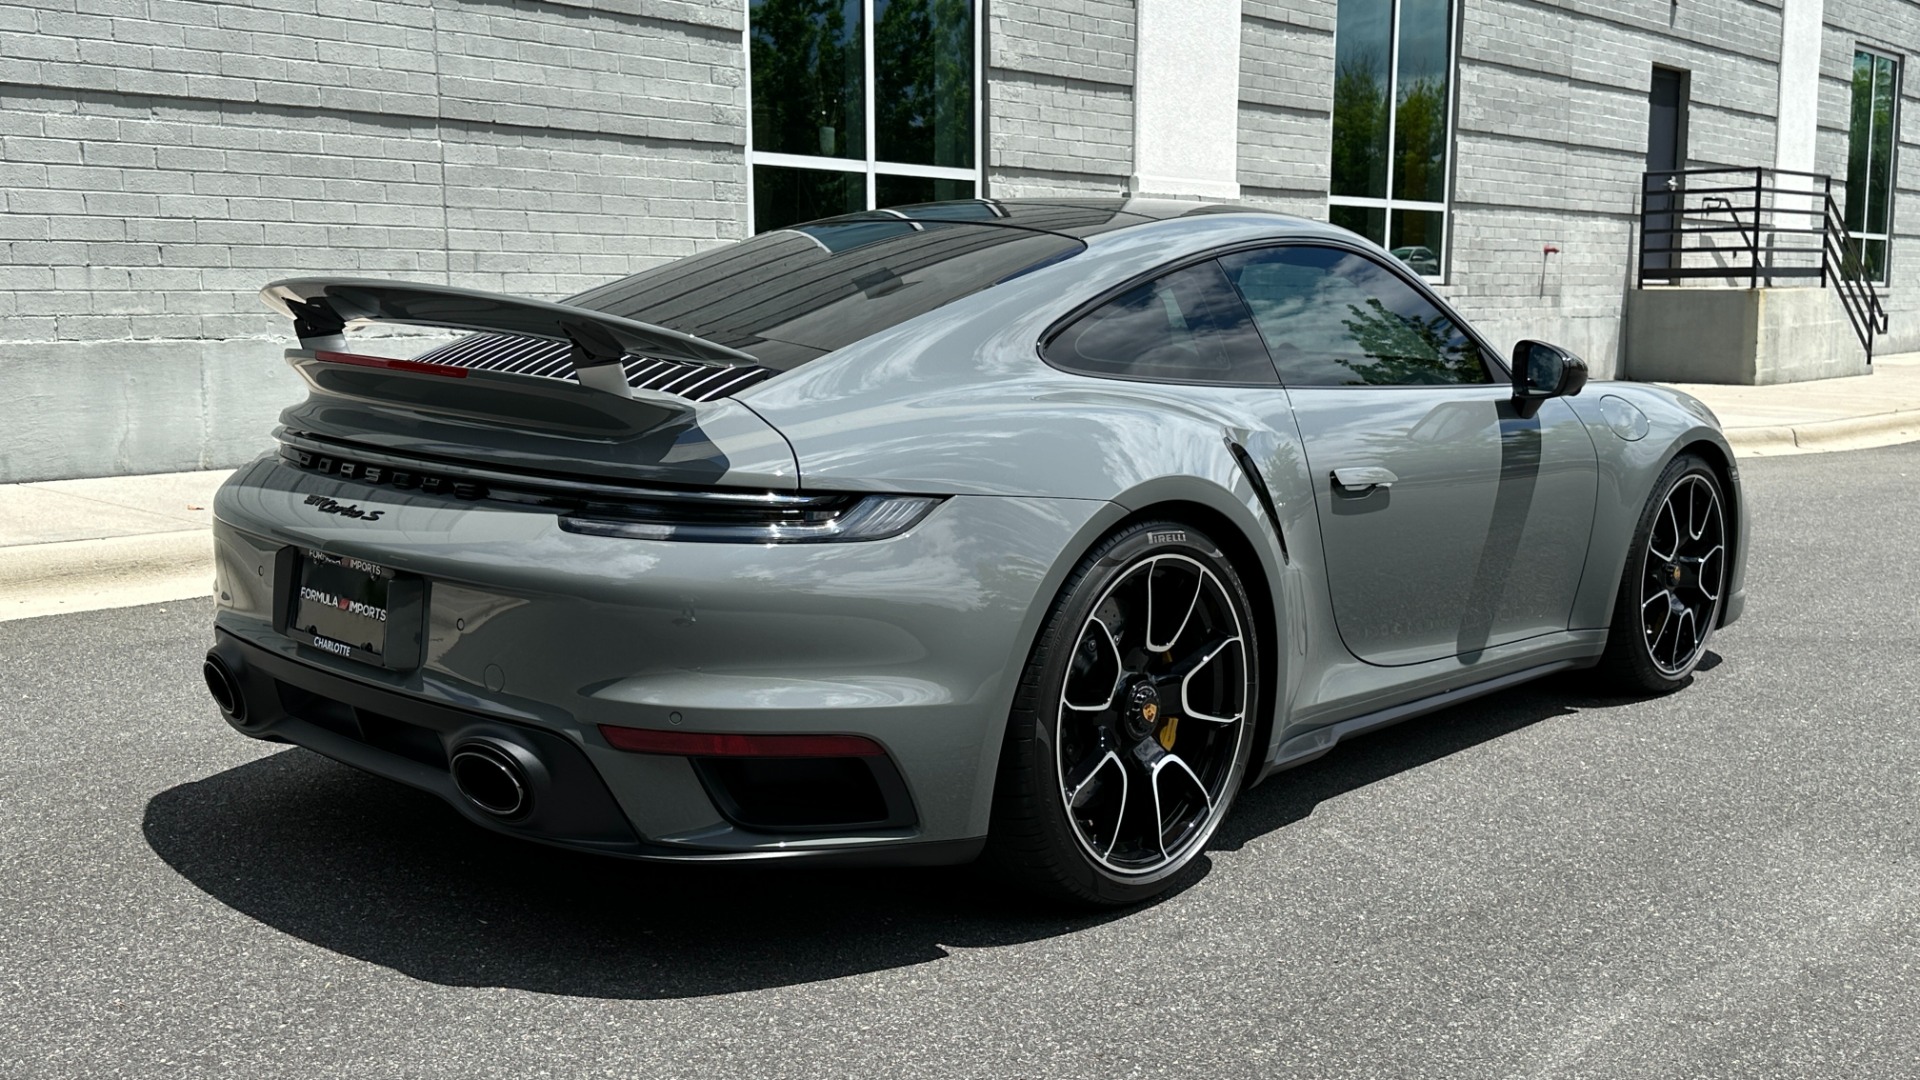 Used 2021 Porsche 911 TURBO S / CUSTOM PTS COLOR / BIG OPTIONS / SPORT SEATS / CARBON FIBER for sale $289,000 at Formula Imports in Charlotte NC 28227 5